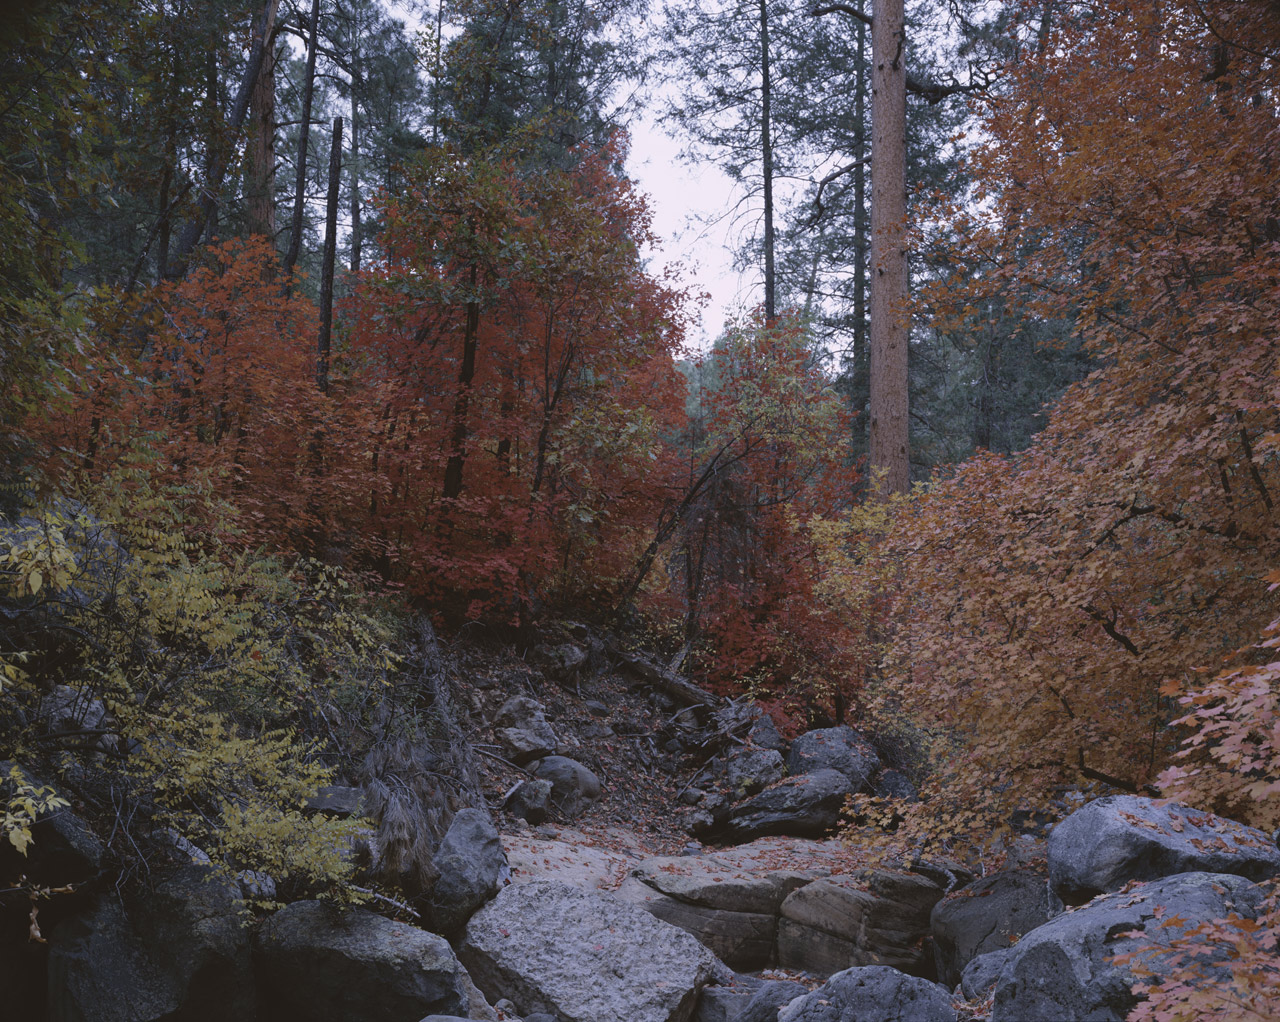 Orange and red leaves on the Maples near Cave Springs in Oak Creek Canyon